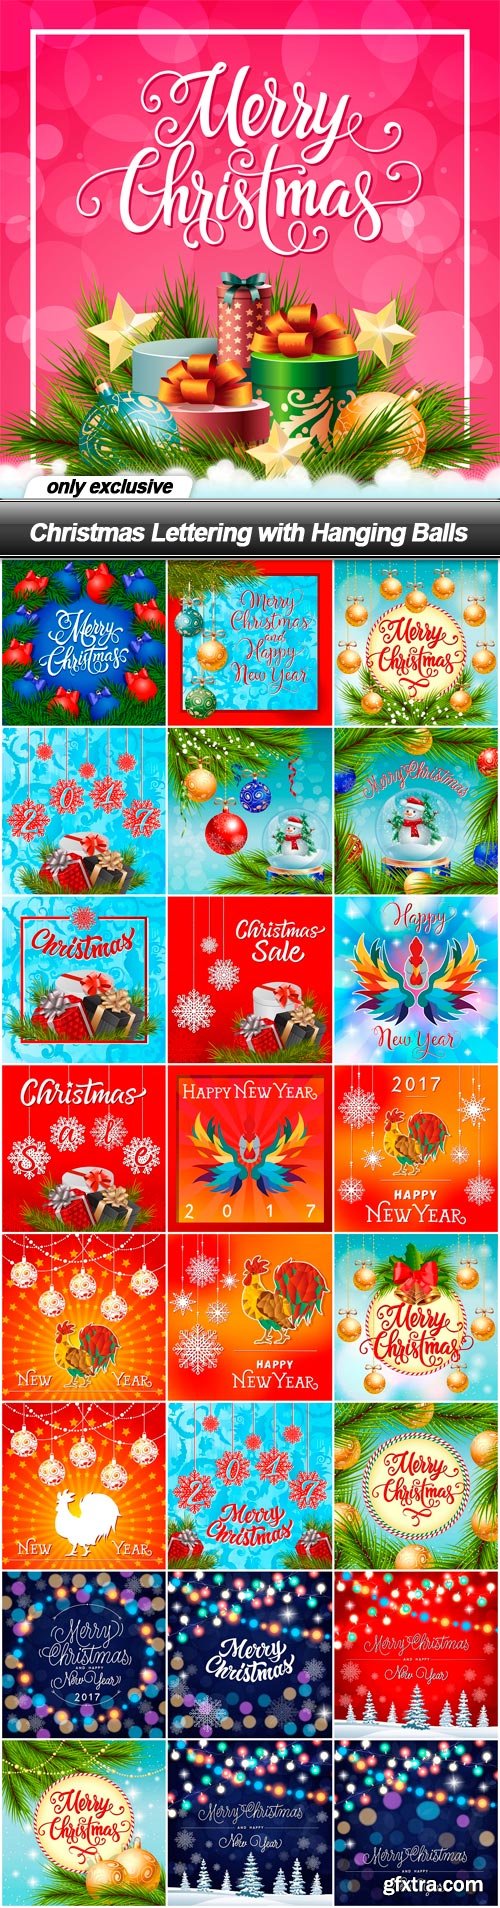 Christmas Lettering with Hanging Balls - 25 EPS